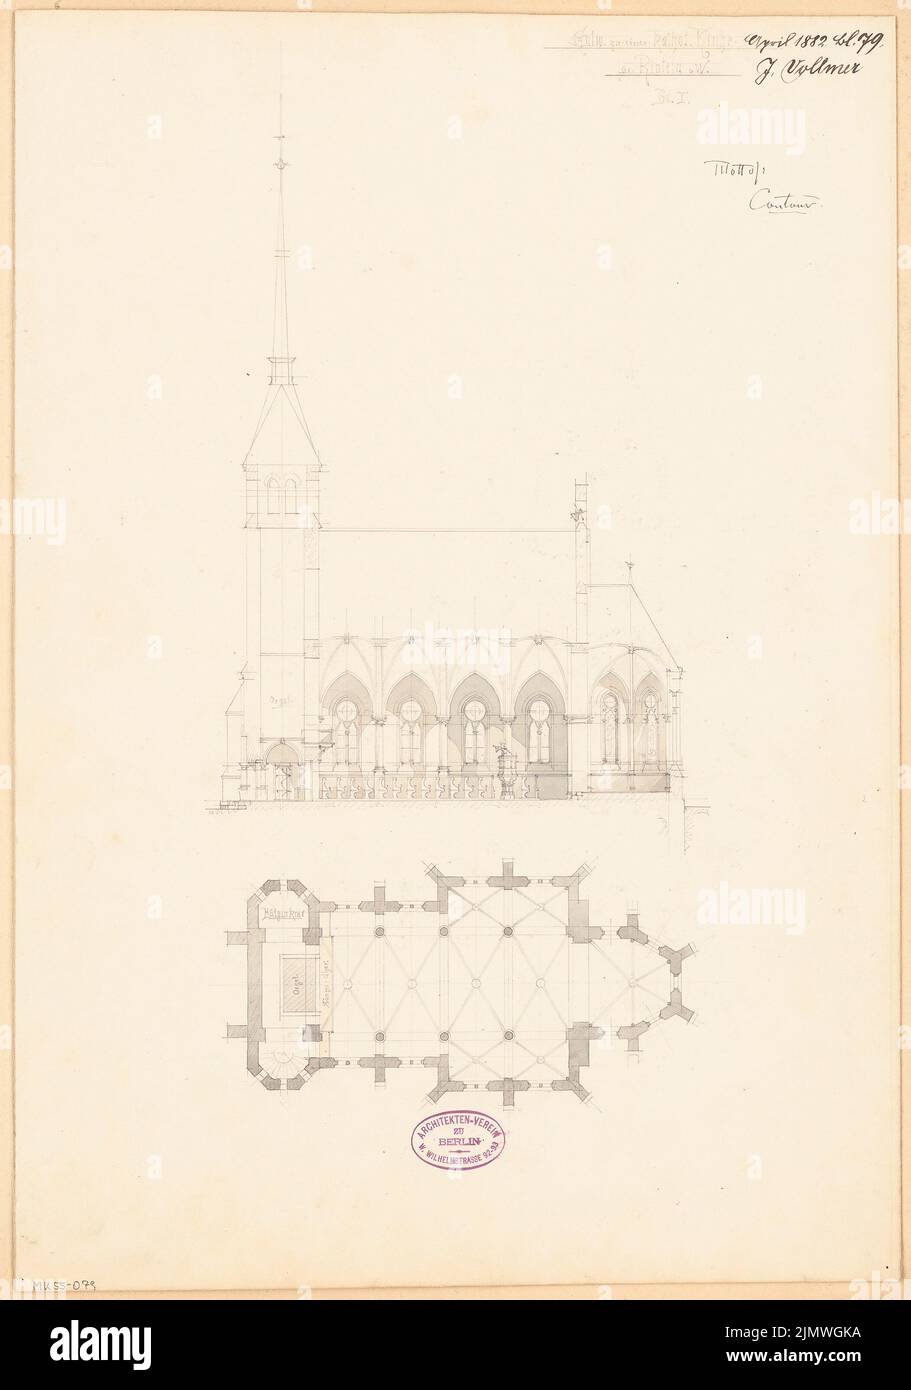 Vollmer Johannes (1845-1920), Catholic Church of St. Sturmius in Rinteln. Monthly competition April 1882 (04.1882): floor plan in a vault, longitudinal section. Pencil watercolored on paper, 52.6 x 36.9 cm (including scan edges) Vollmer Johannes  (1845-1920): Katholische Kirche St. Sturmius, Rinteln. Monatskonkurrenz April 1882 Stock Photo